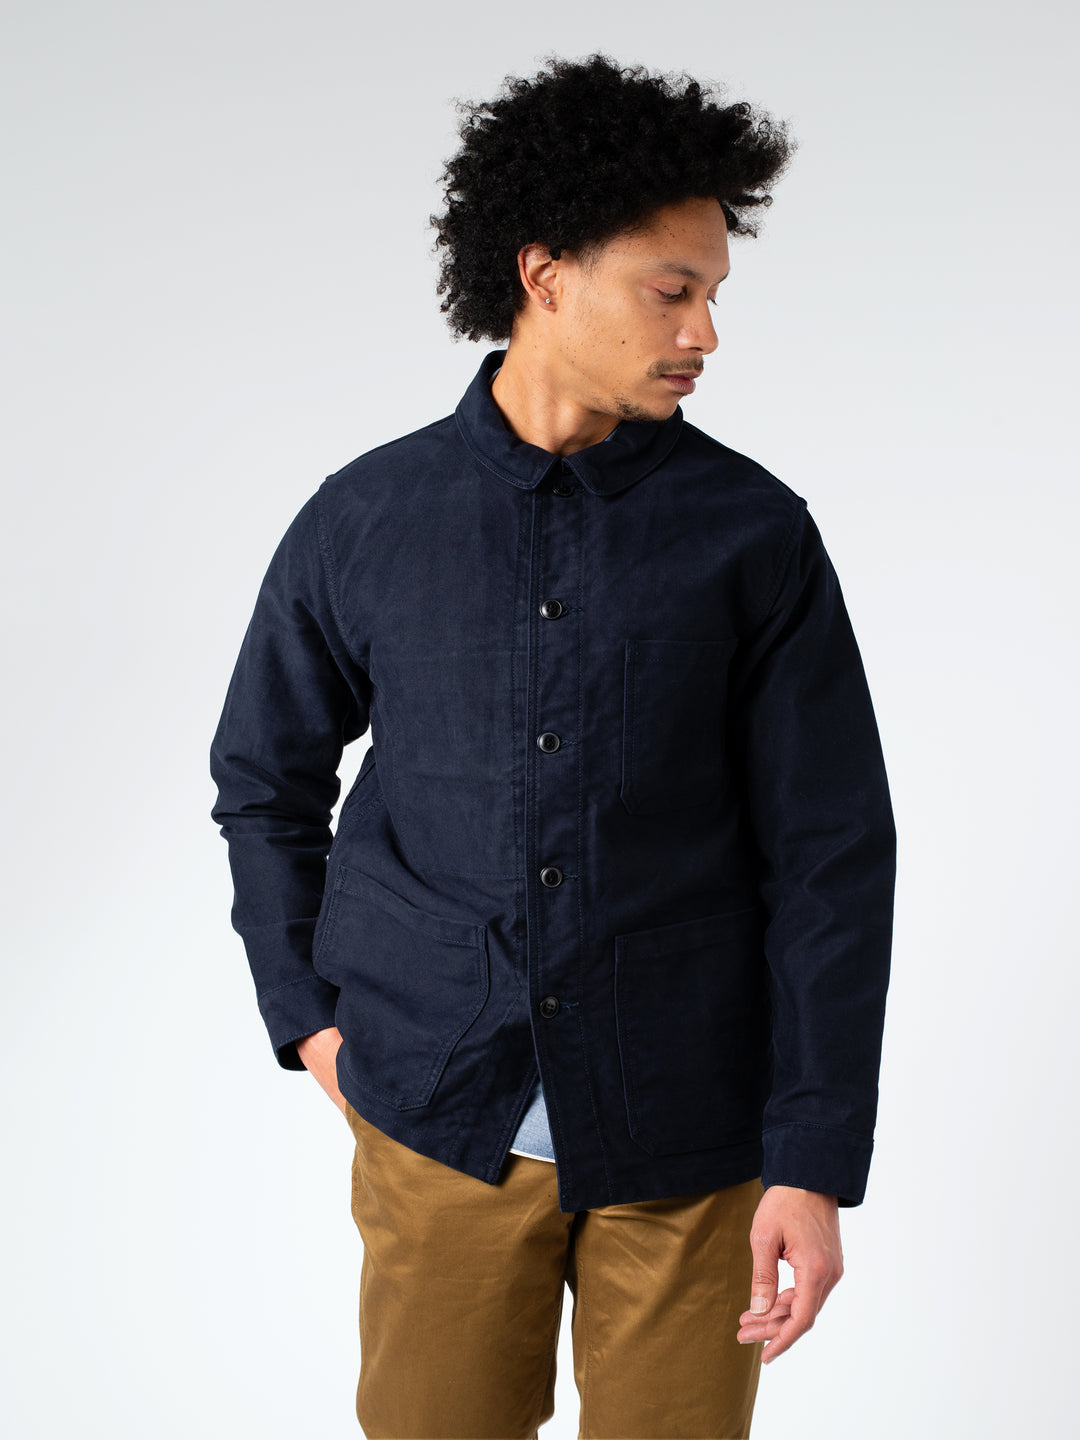 men's new arrivals – Tagged 